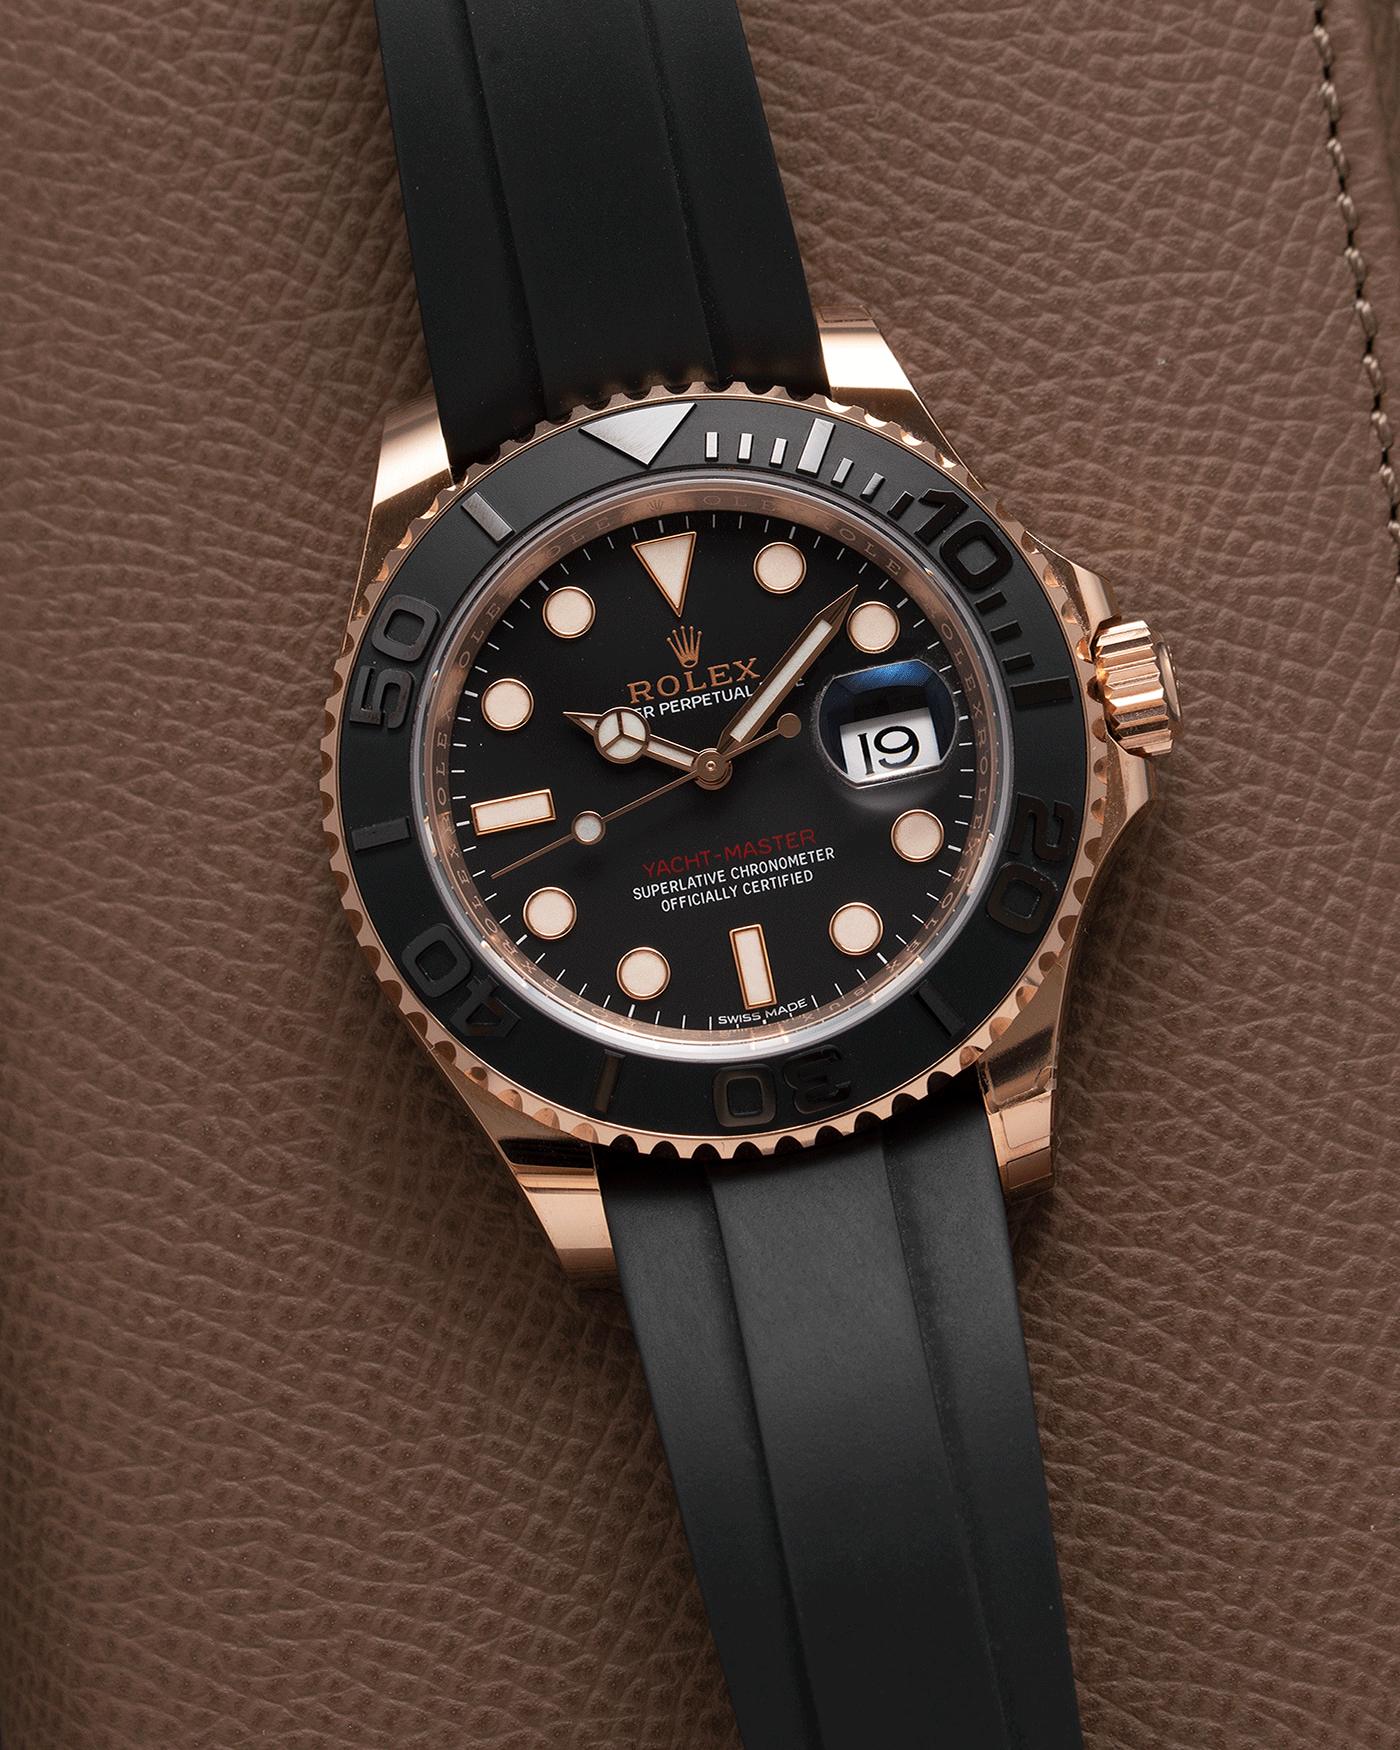 Baselworld 2015: Rolex Launches New Everose Gold Yacht-Master with